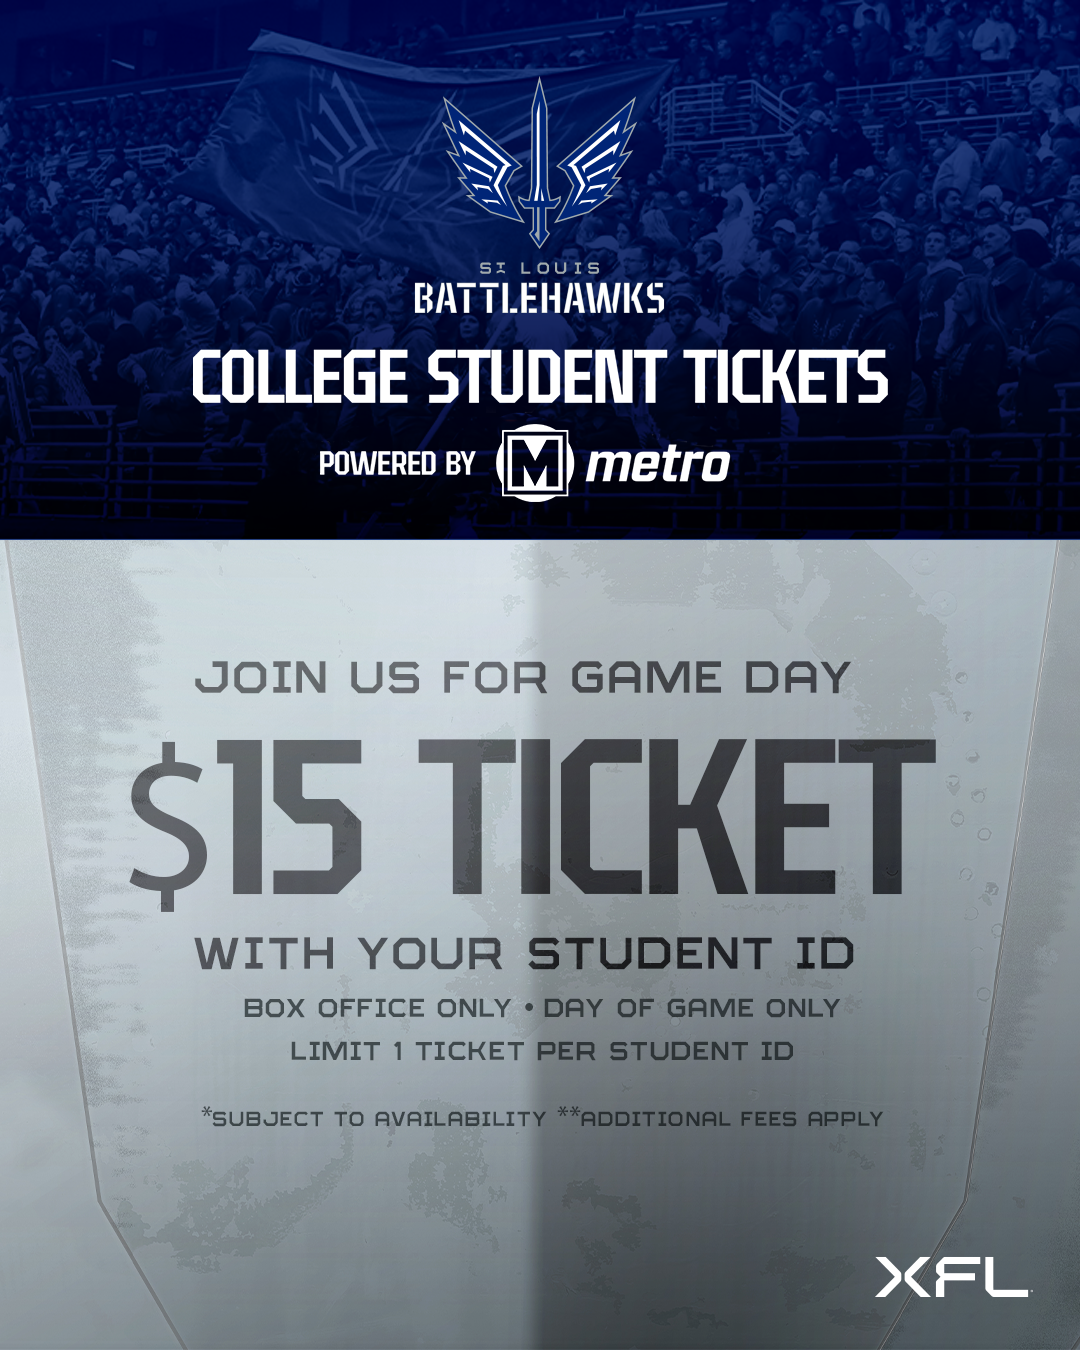 Special Battlehawks Ticket Deal for College Students